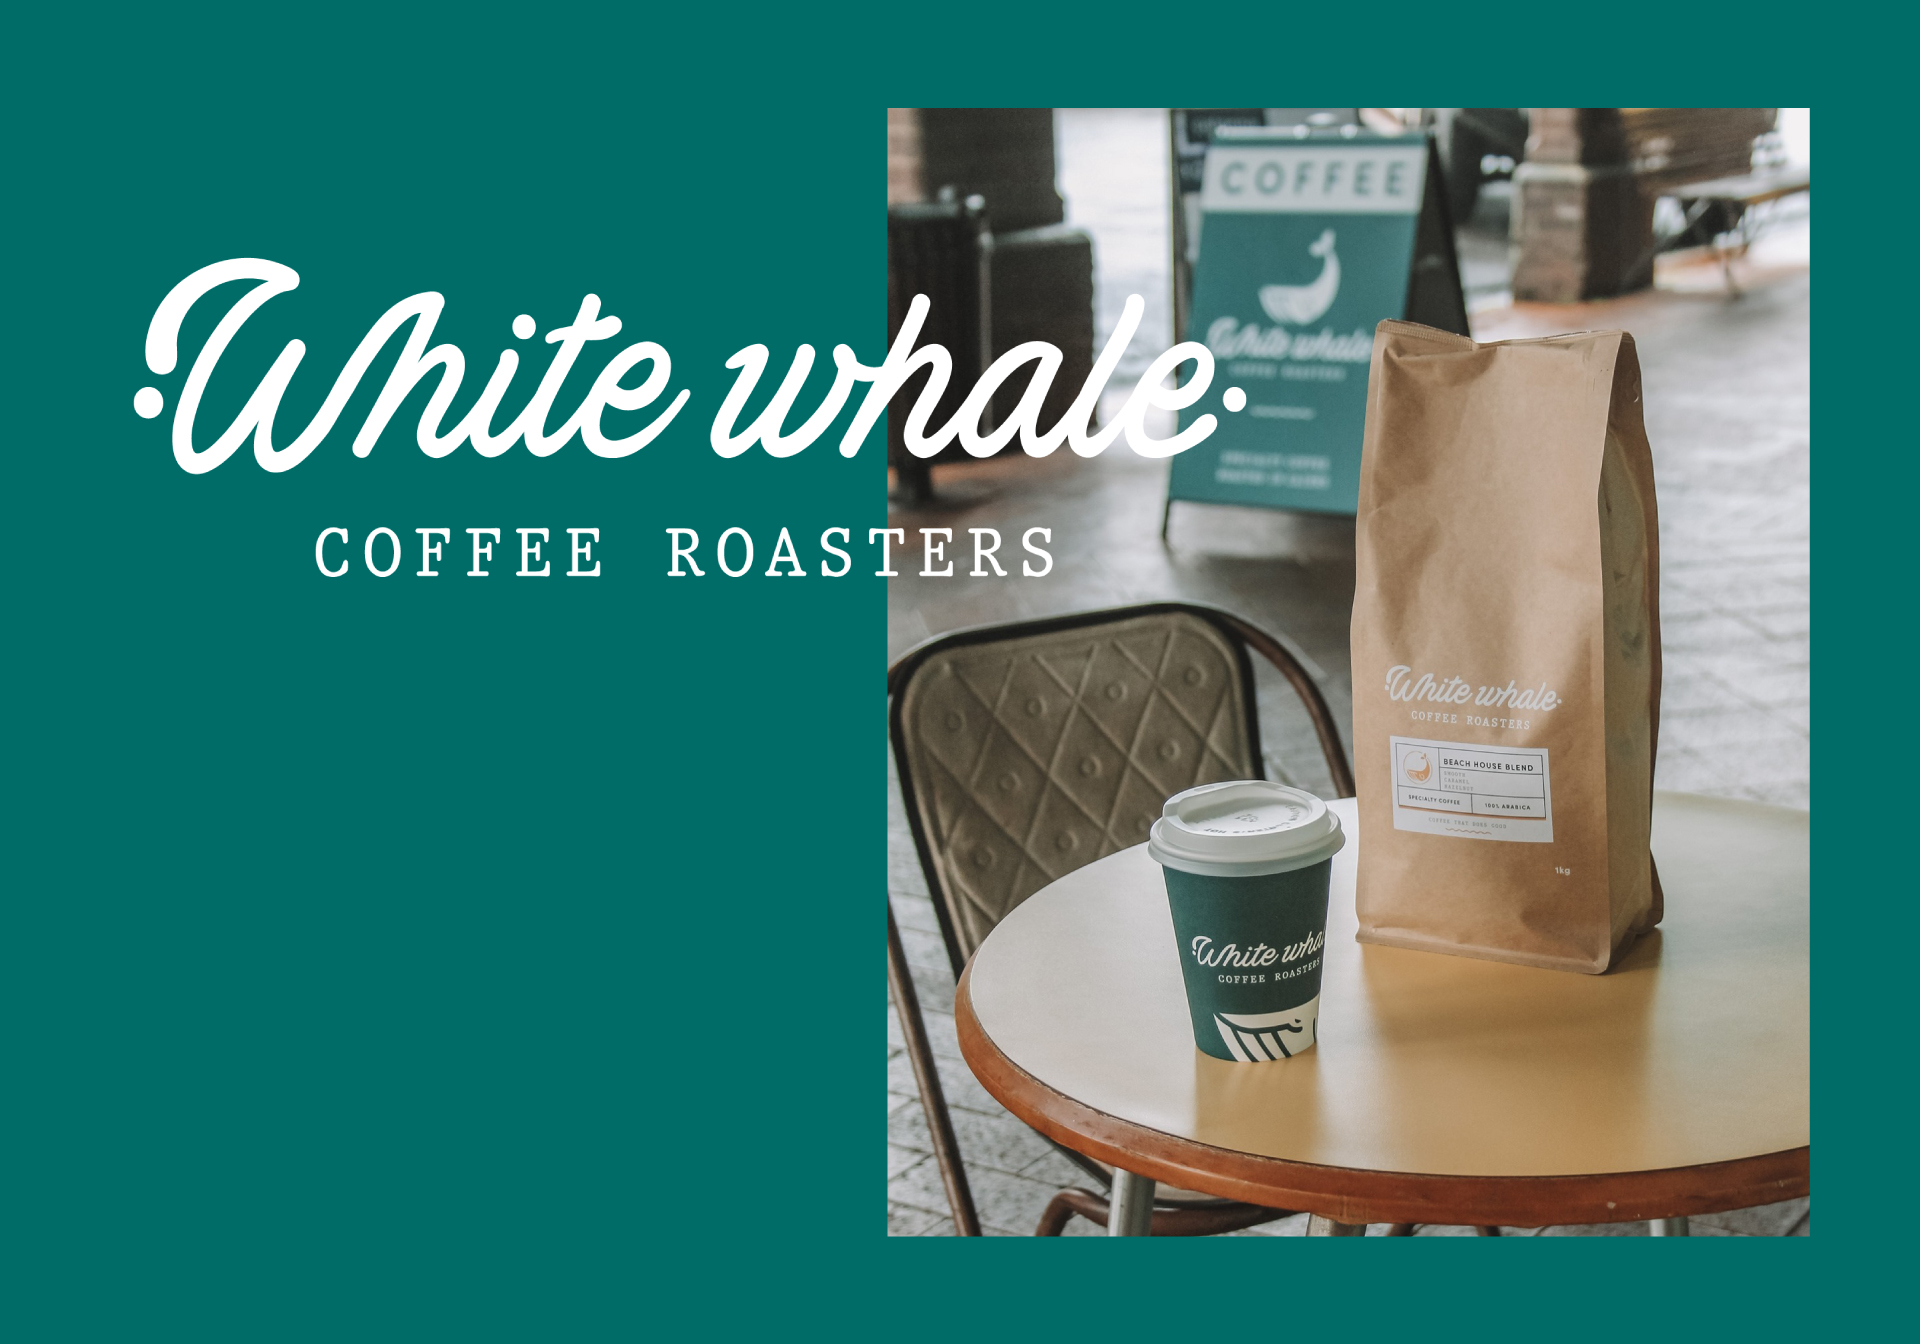 White Whale Coffee Roasters new brand and logo design